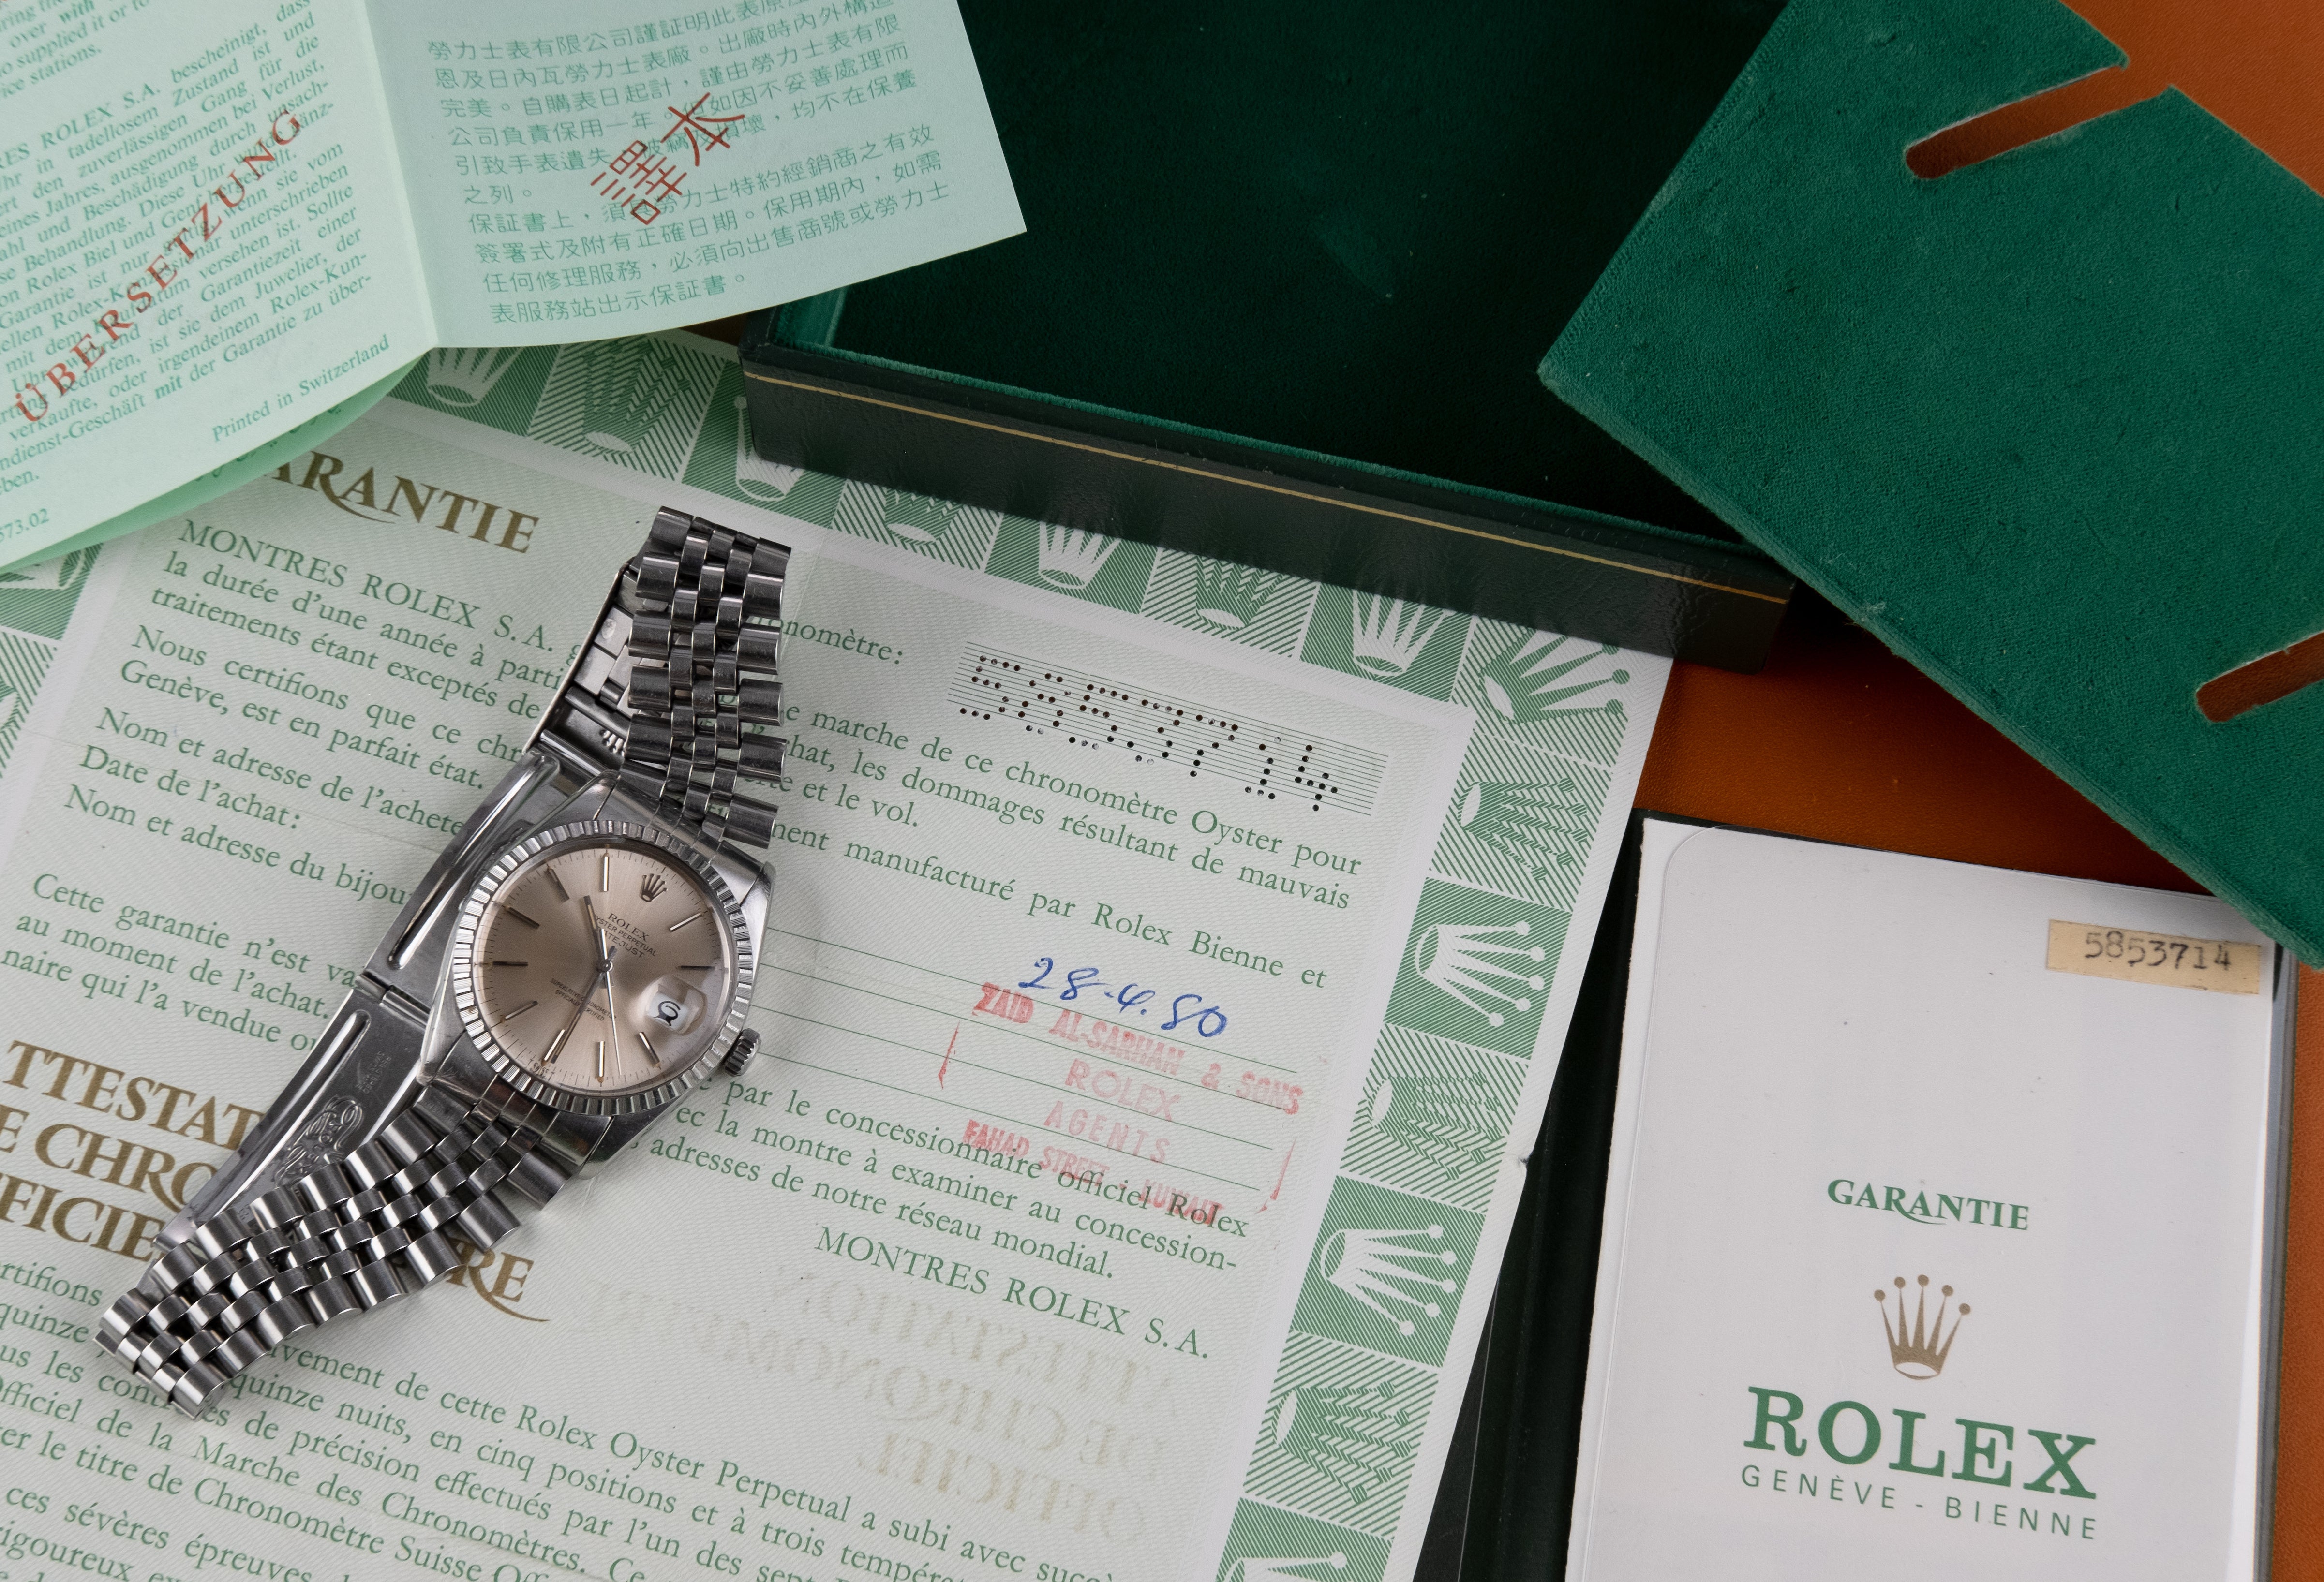 ROLEX Oyster Perpetual Datejust Ref. 16030 Box & Papers (1979)